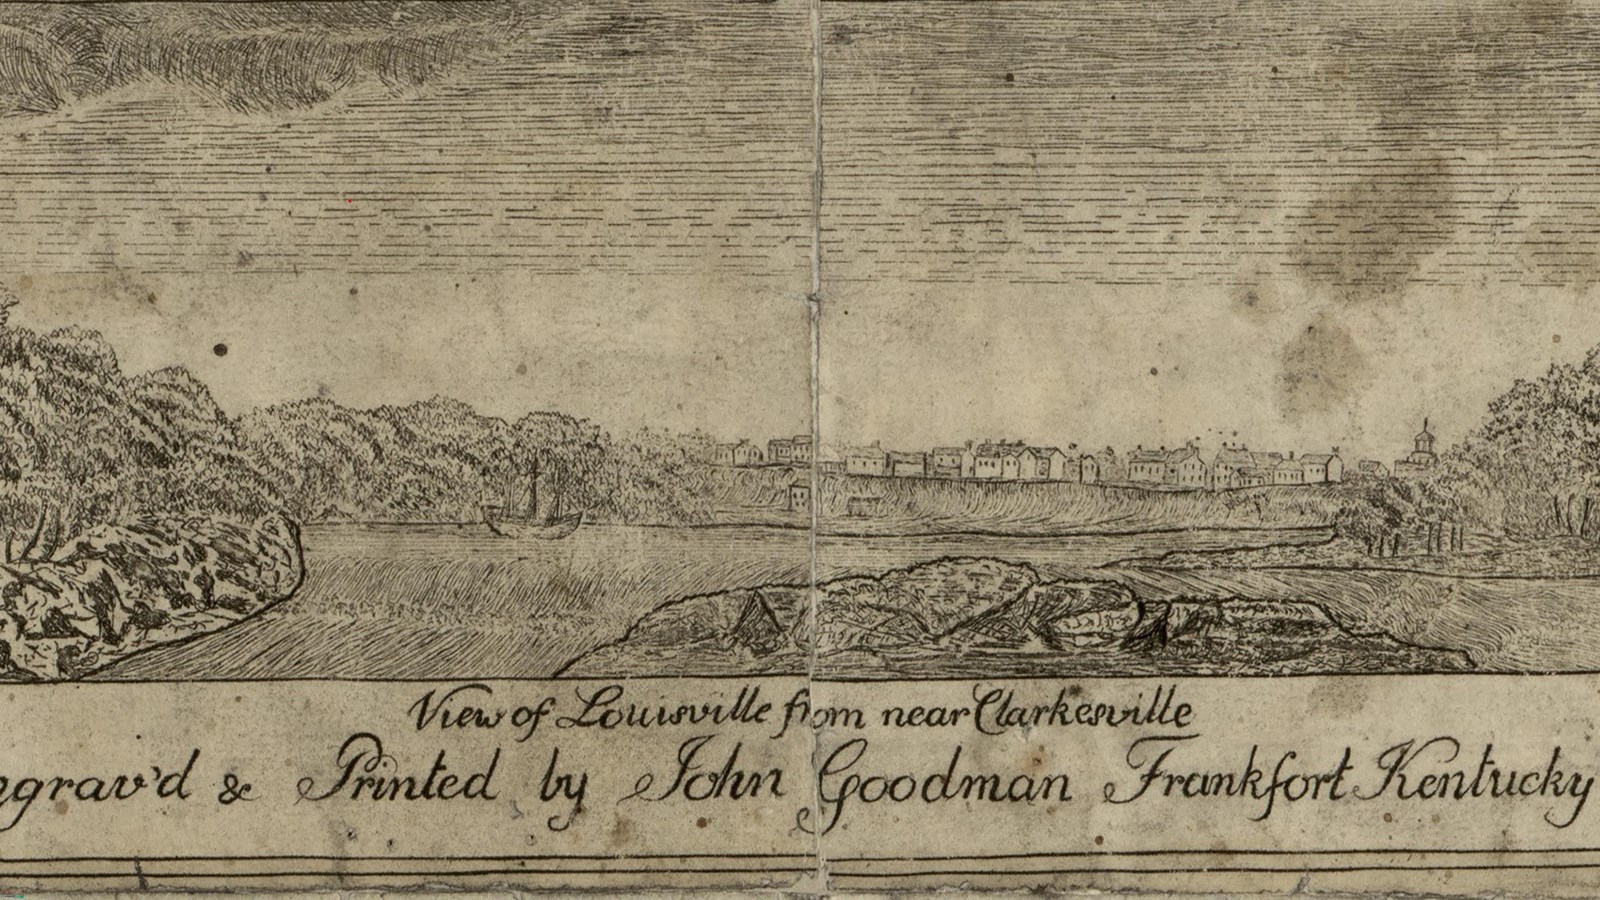 Drawing of the town as Louisville as viewed from across the Ohio River. 